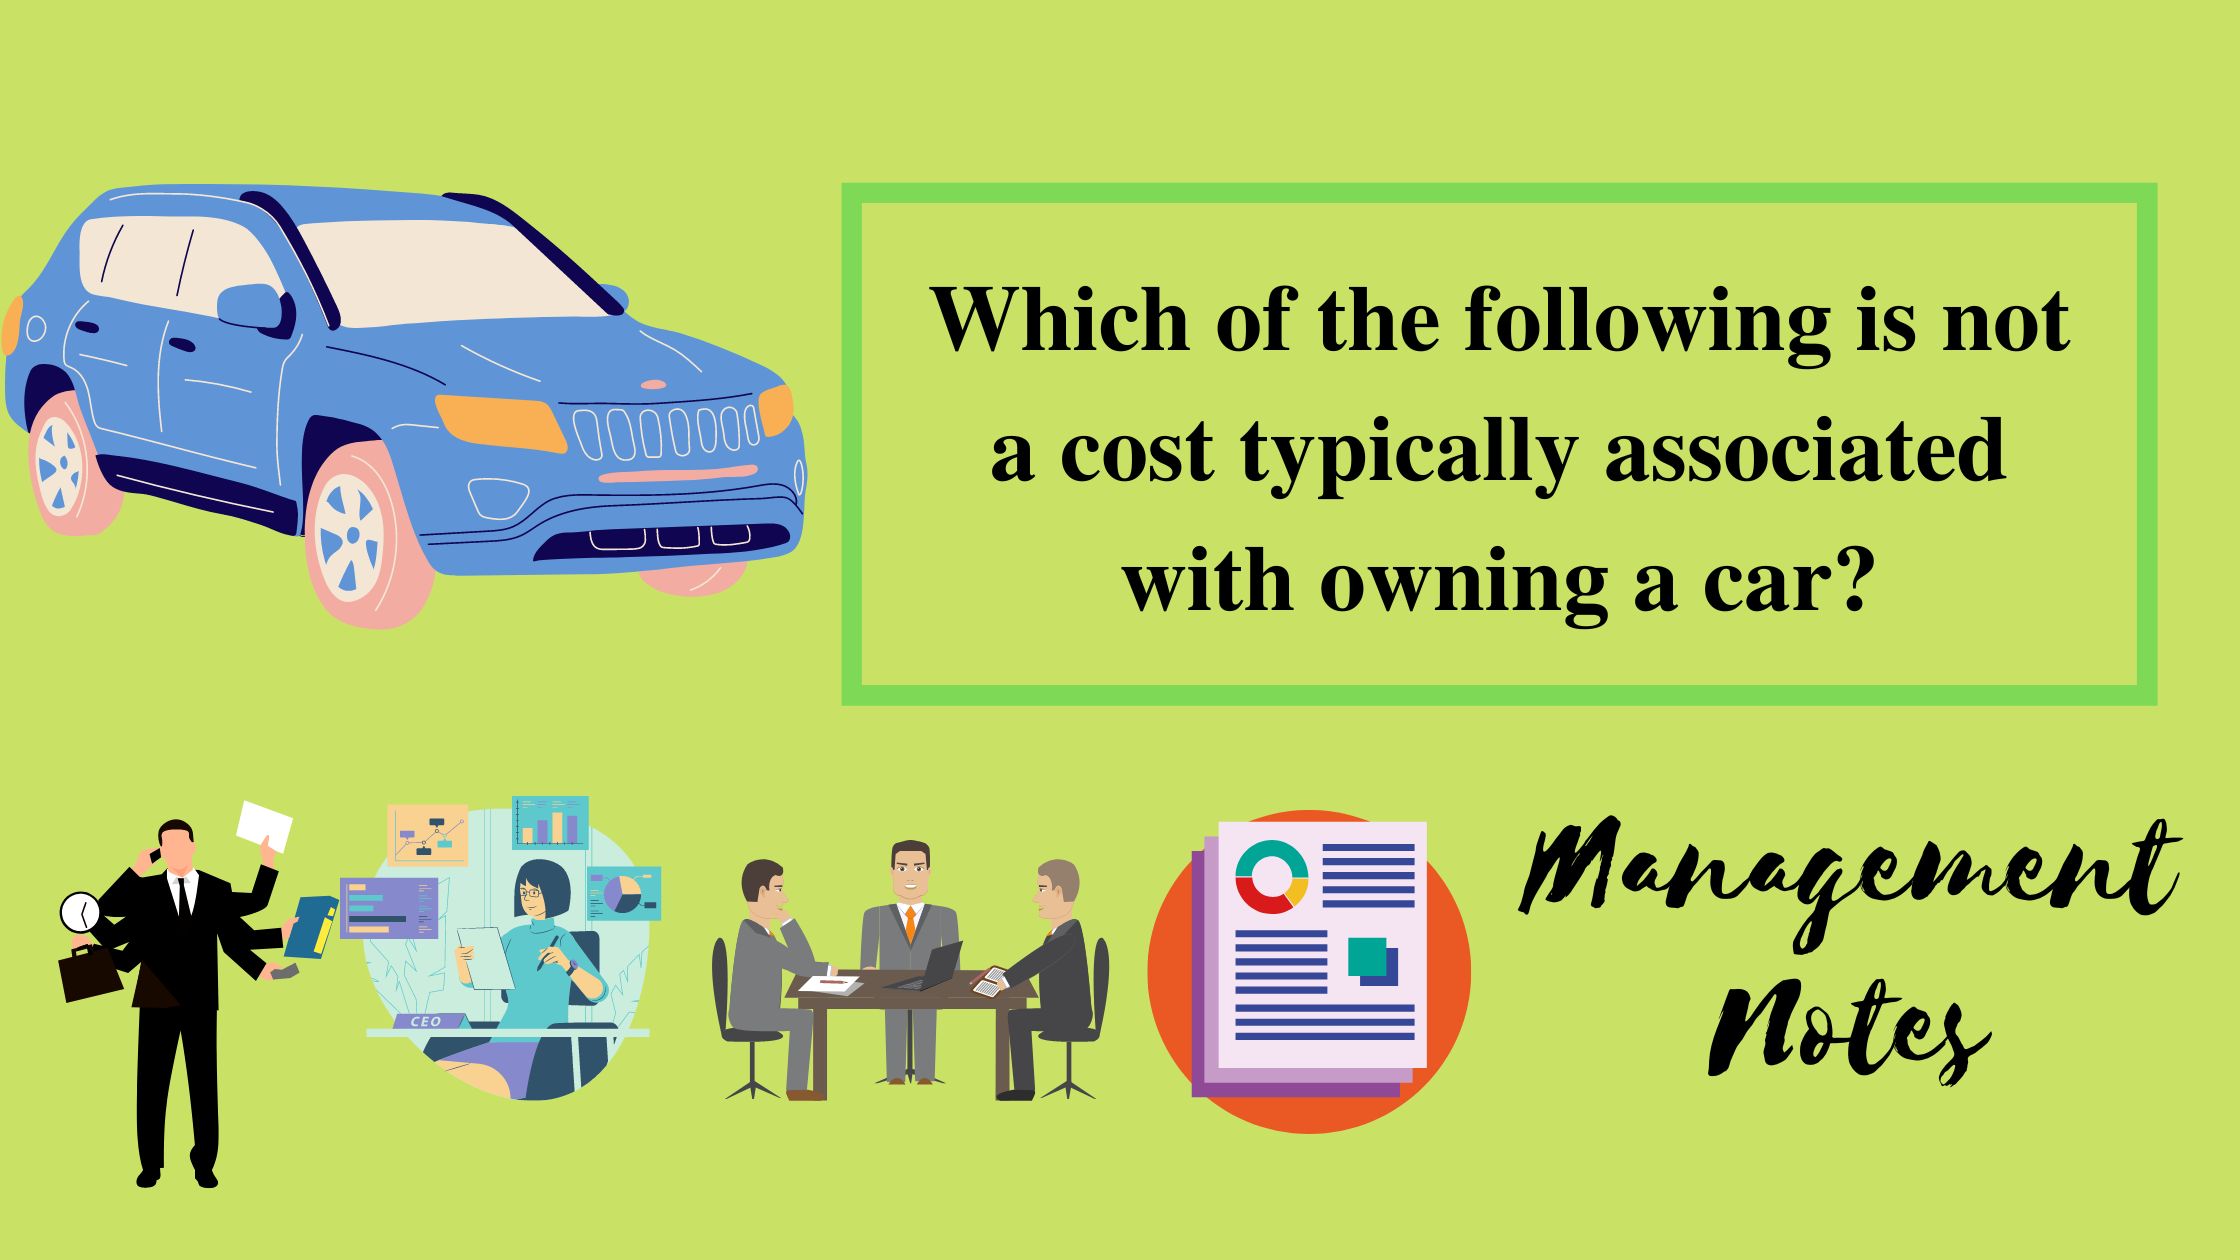 Which of the following is not a cost typically associated with owning a car?